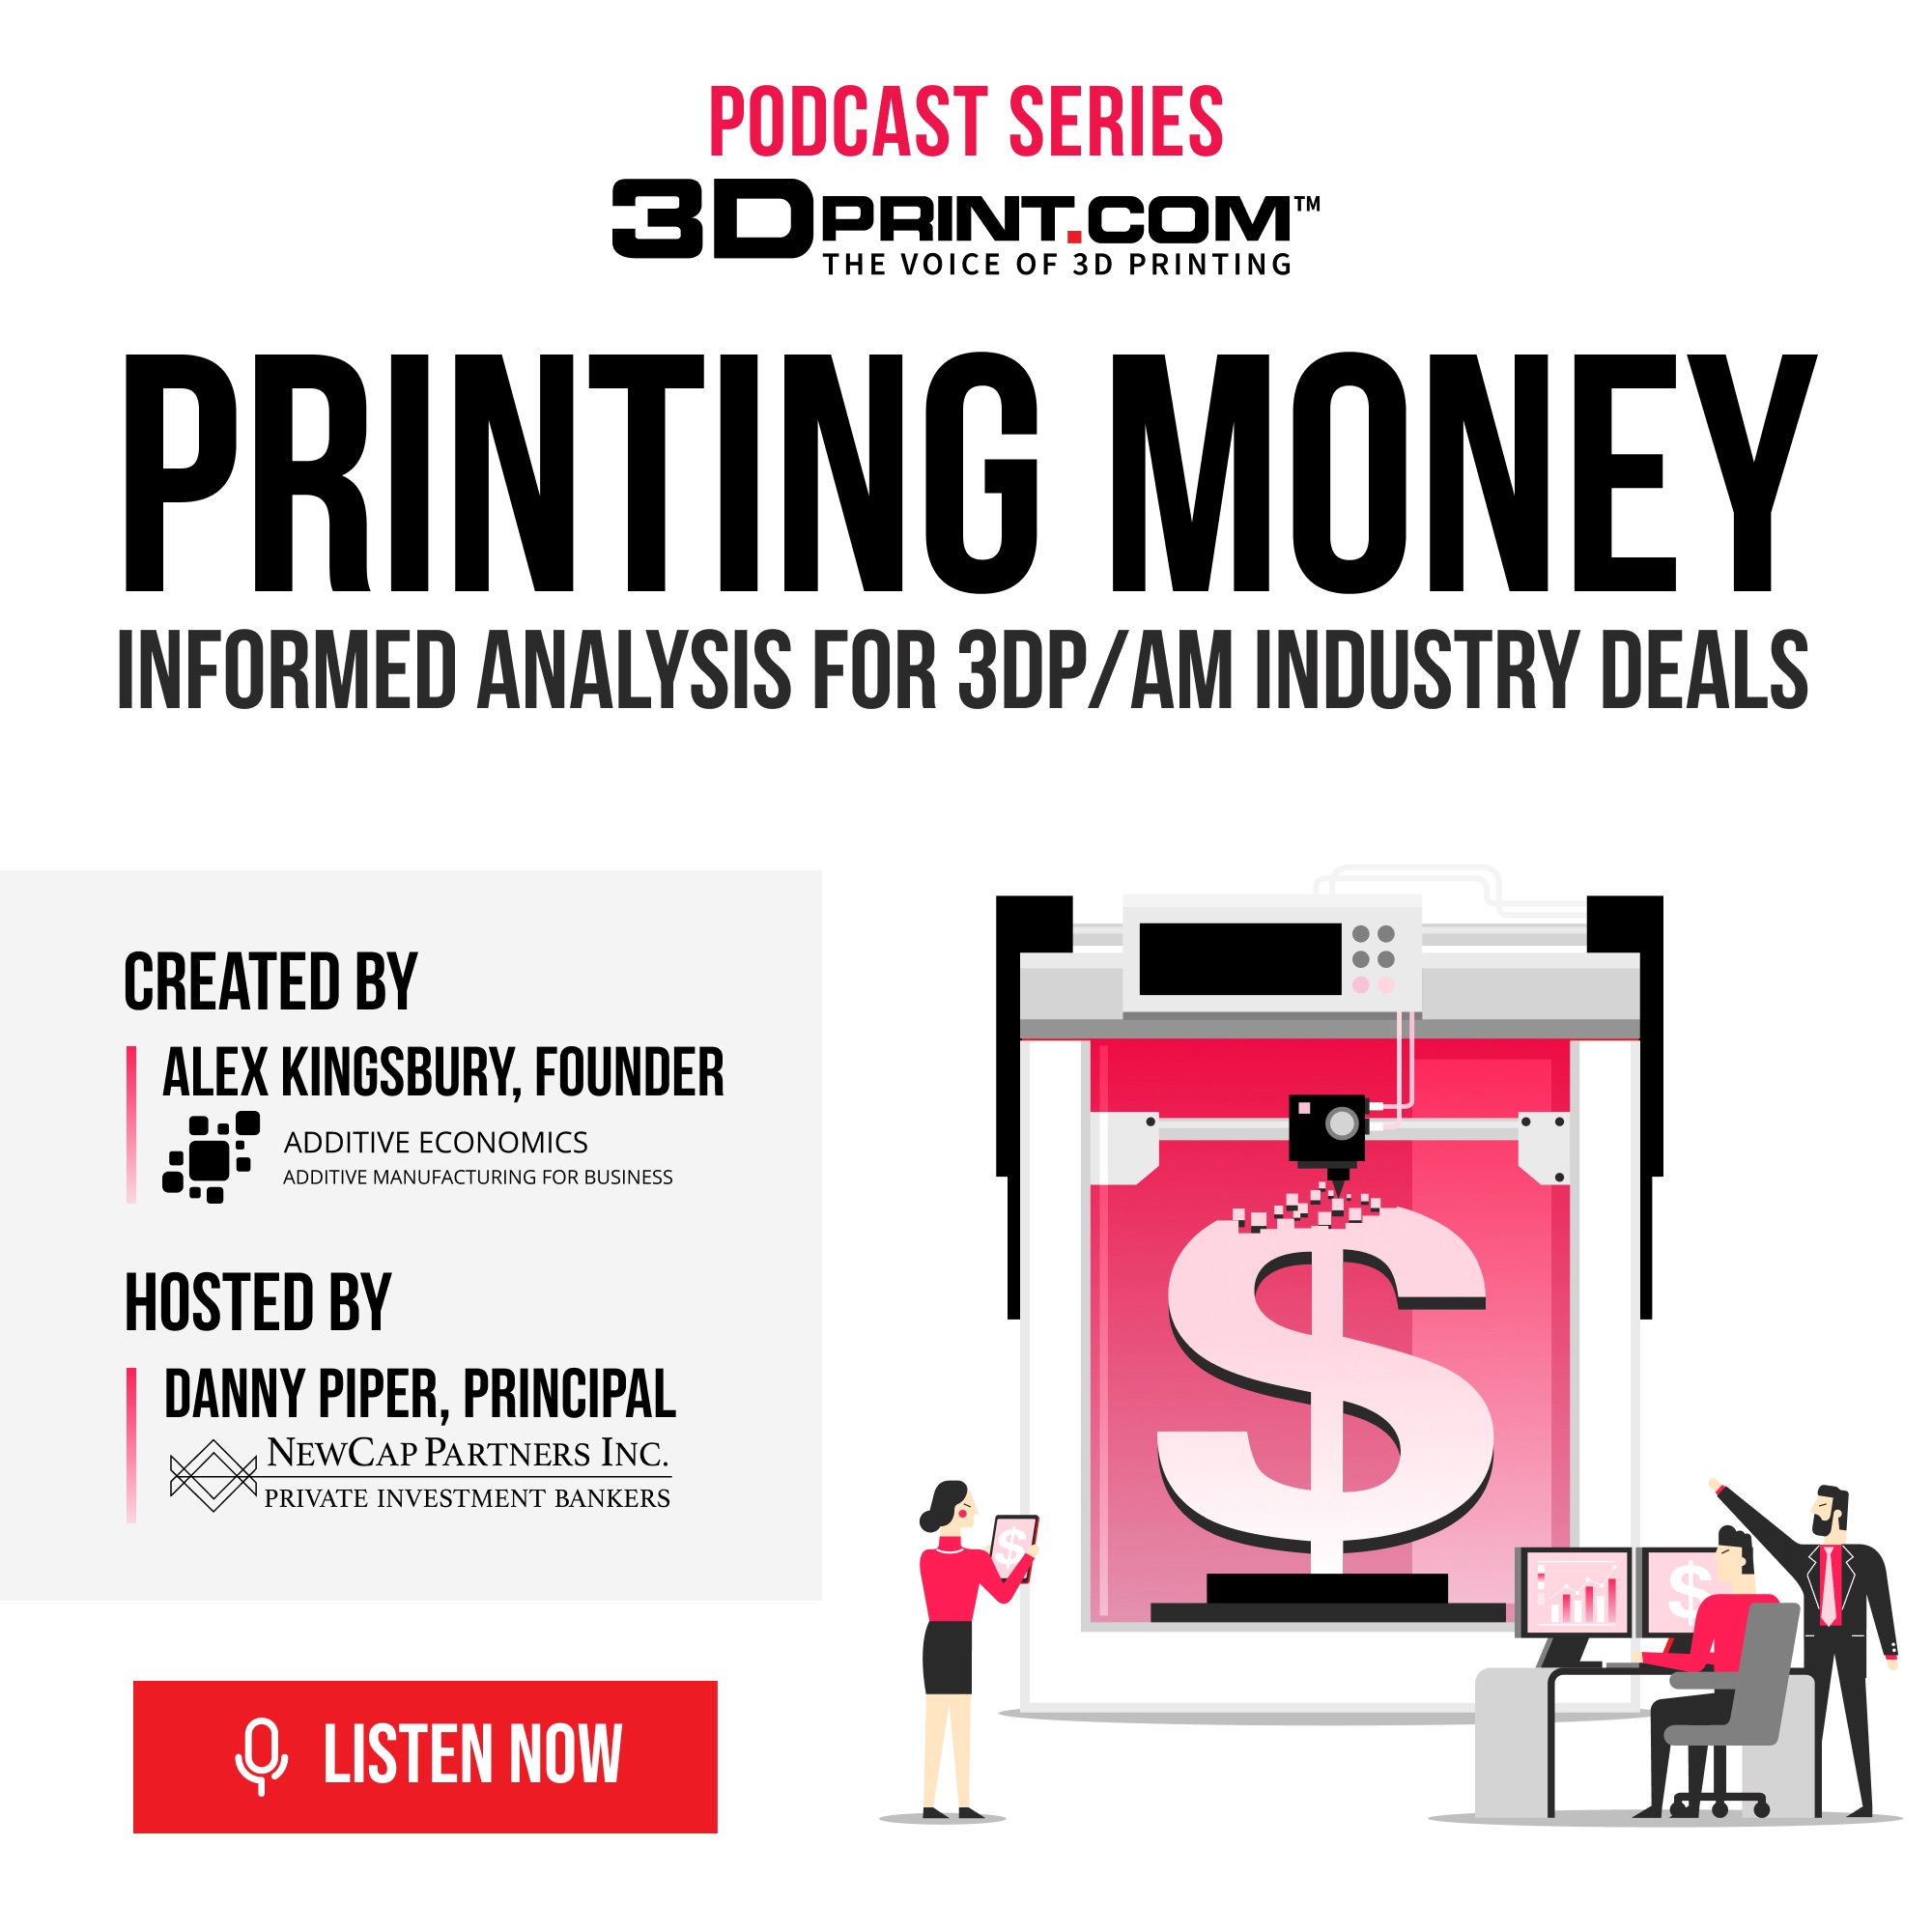 Printing Money Episode 18: The DC Fly-In with Mark Burnham, AddMfgCoalition